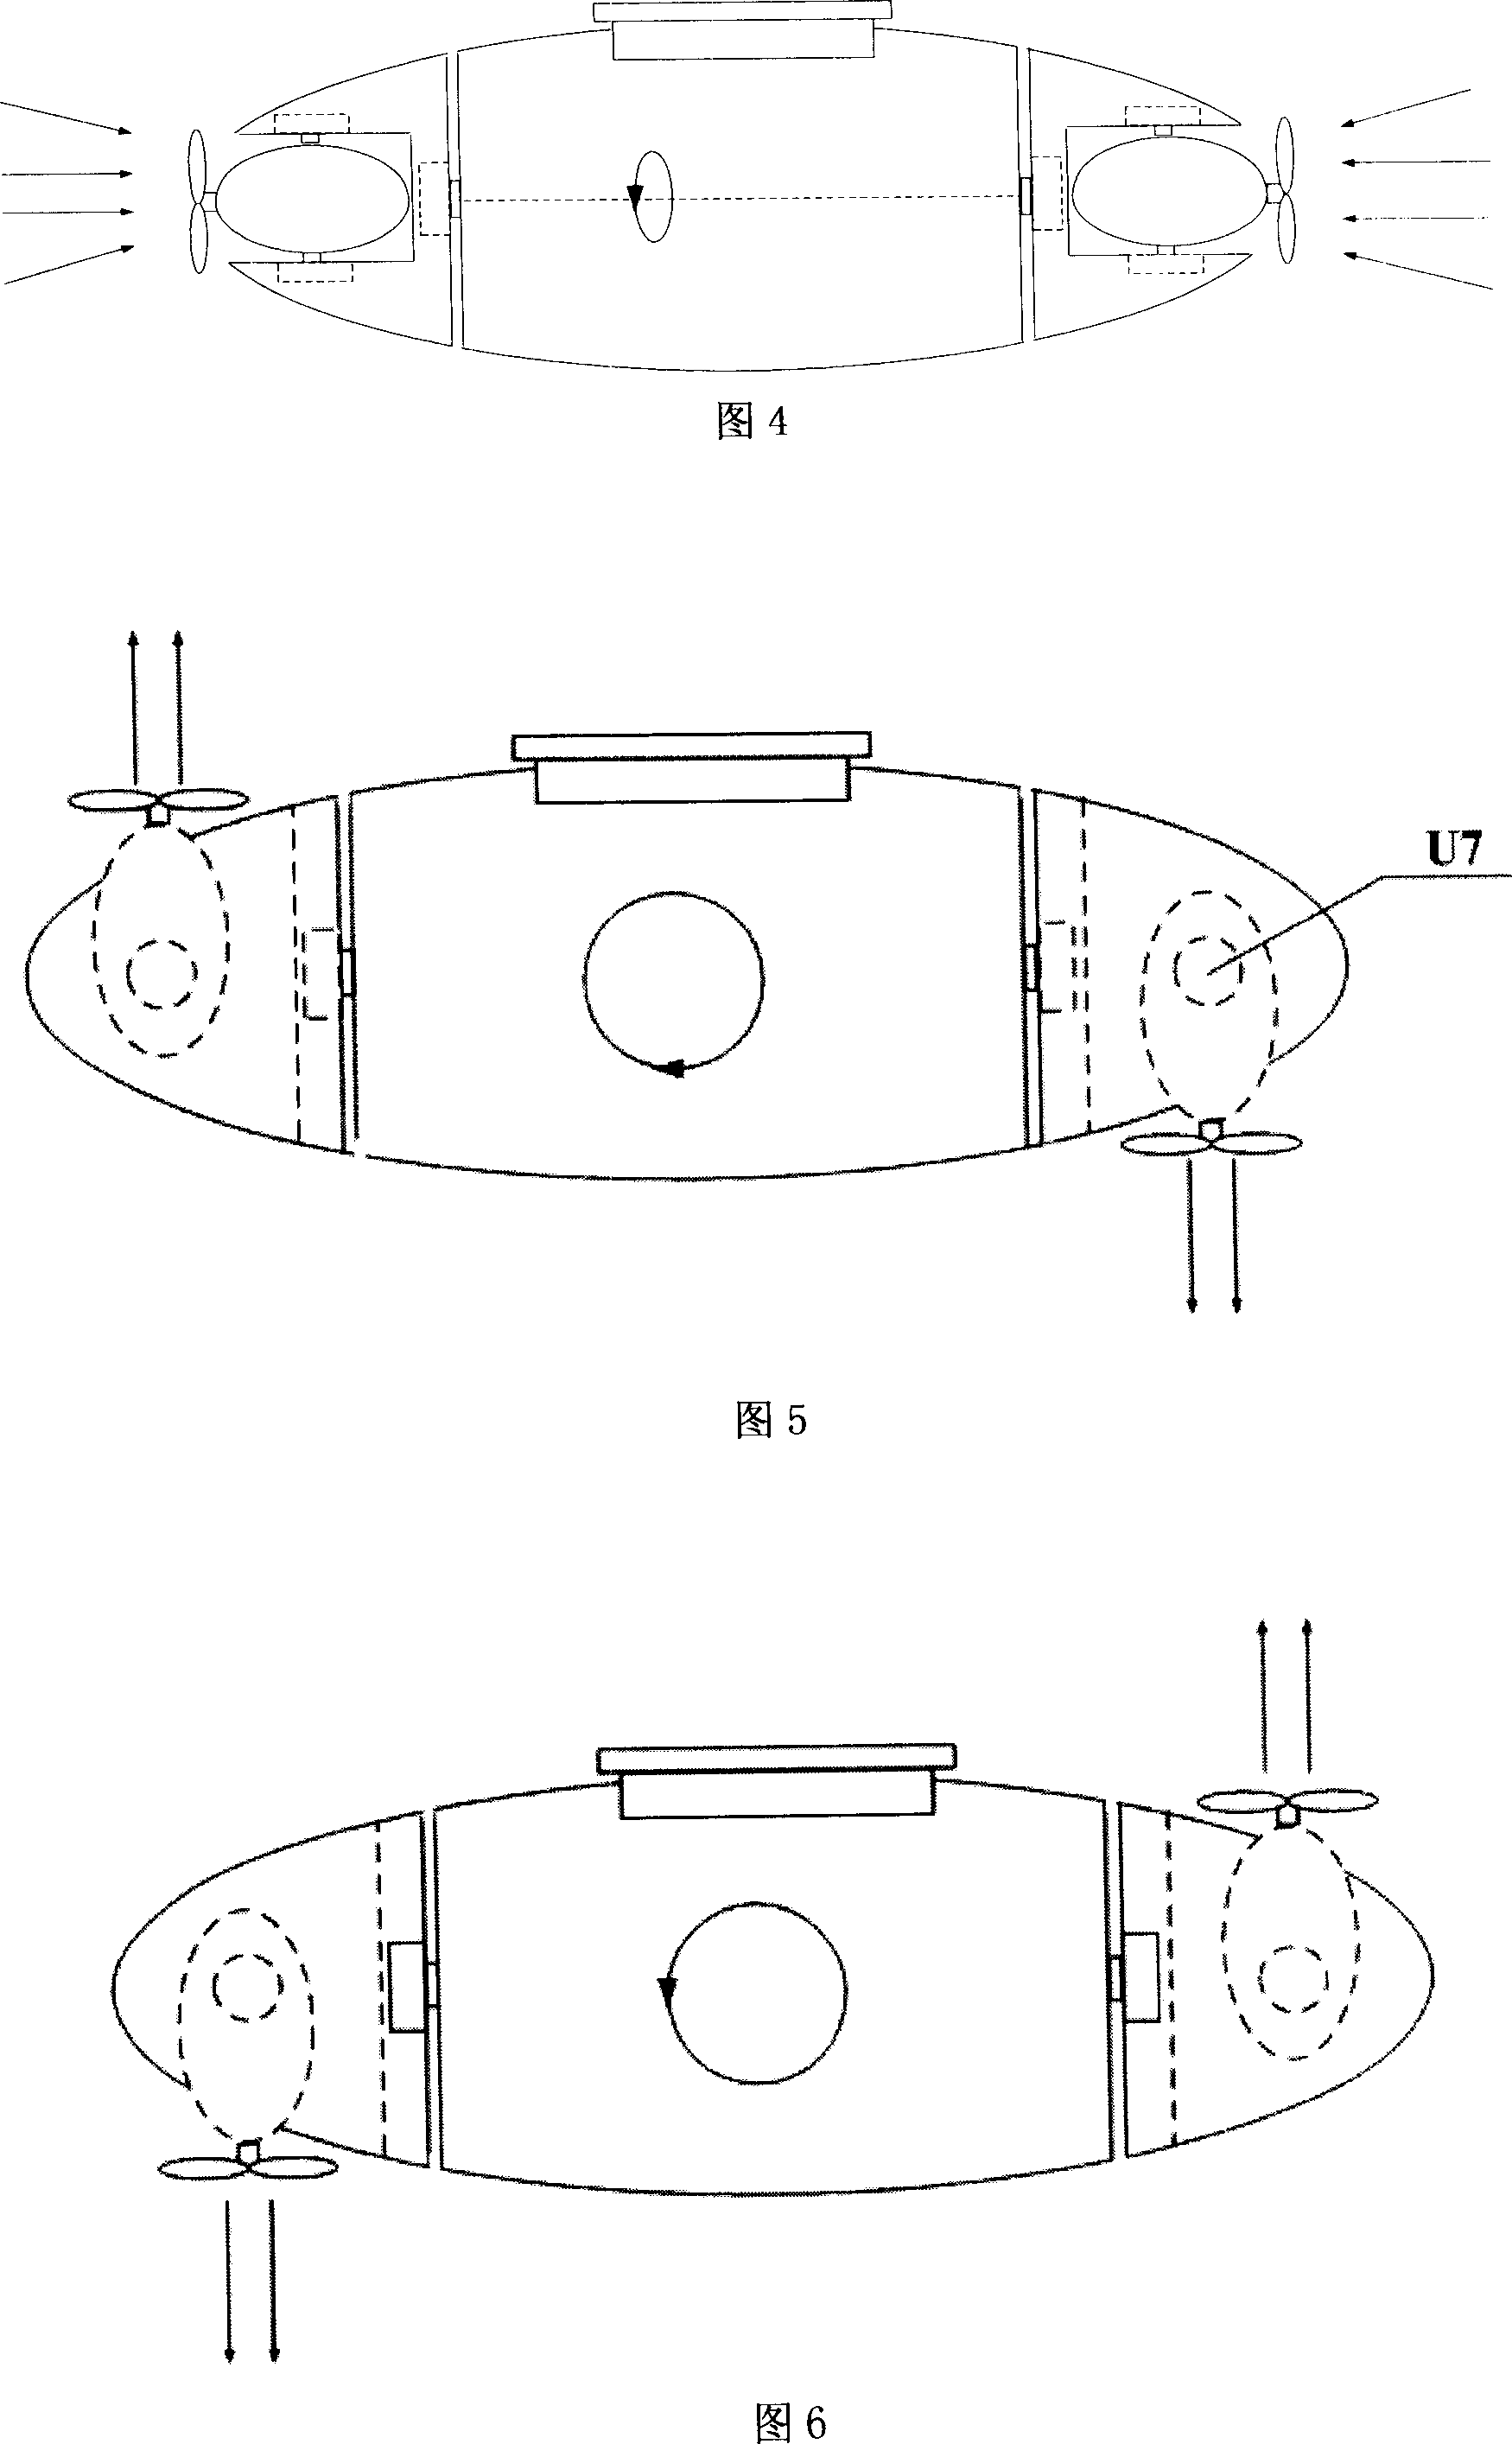 Turning, rotating propeller of underwater robot with six degrees of freedom